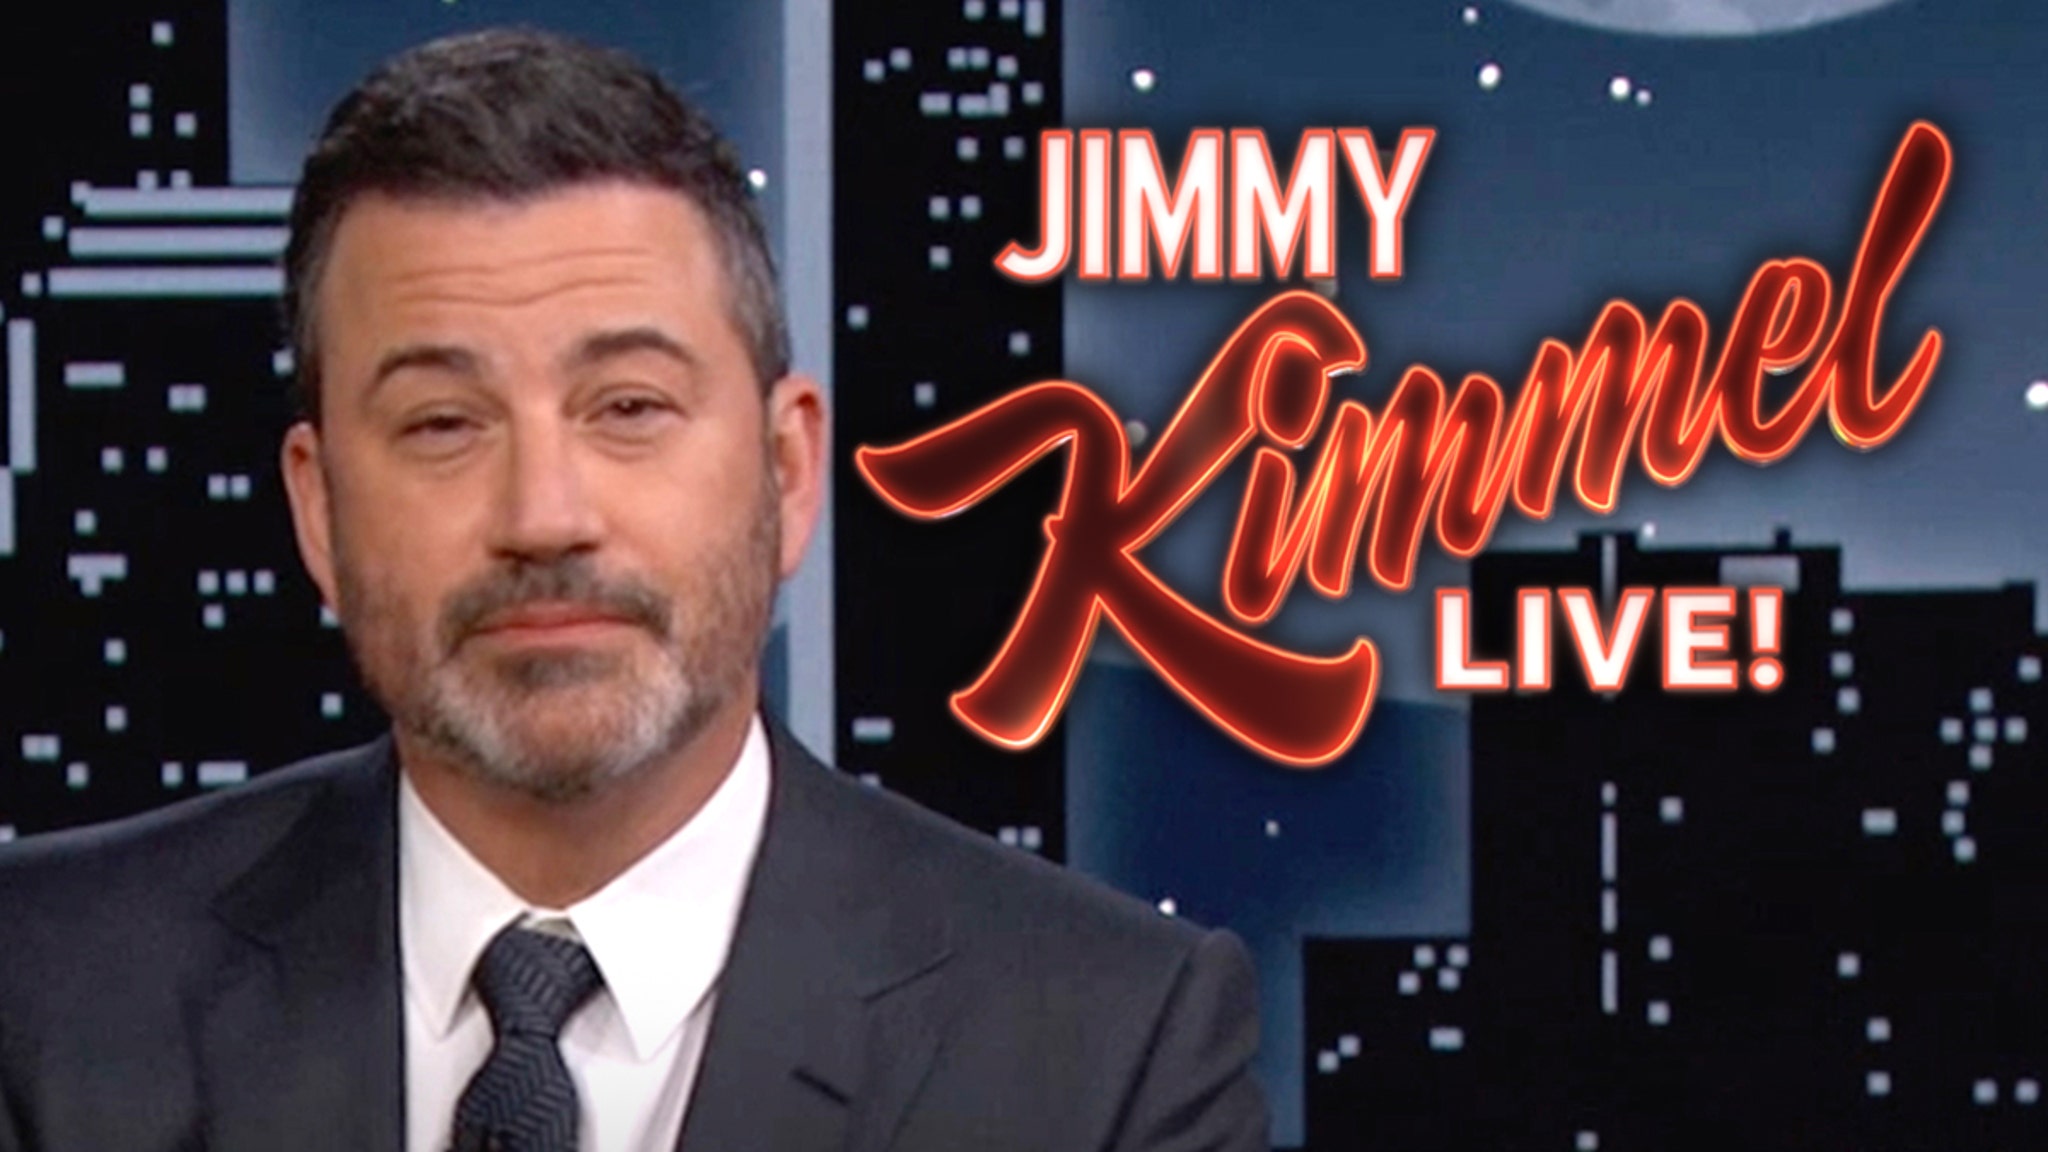 Jimmy Kimmel Says He Likely Won't Renew Late Night Show Contract